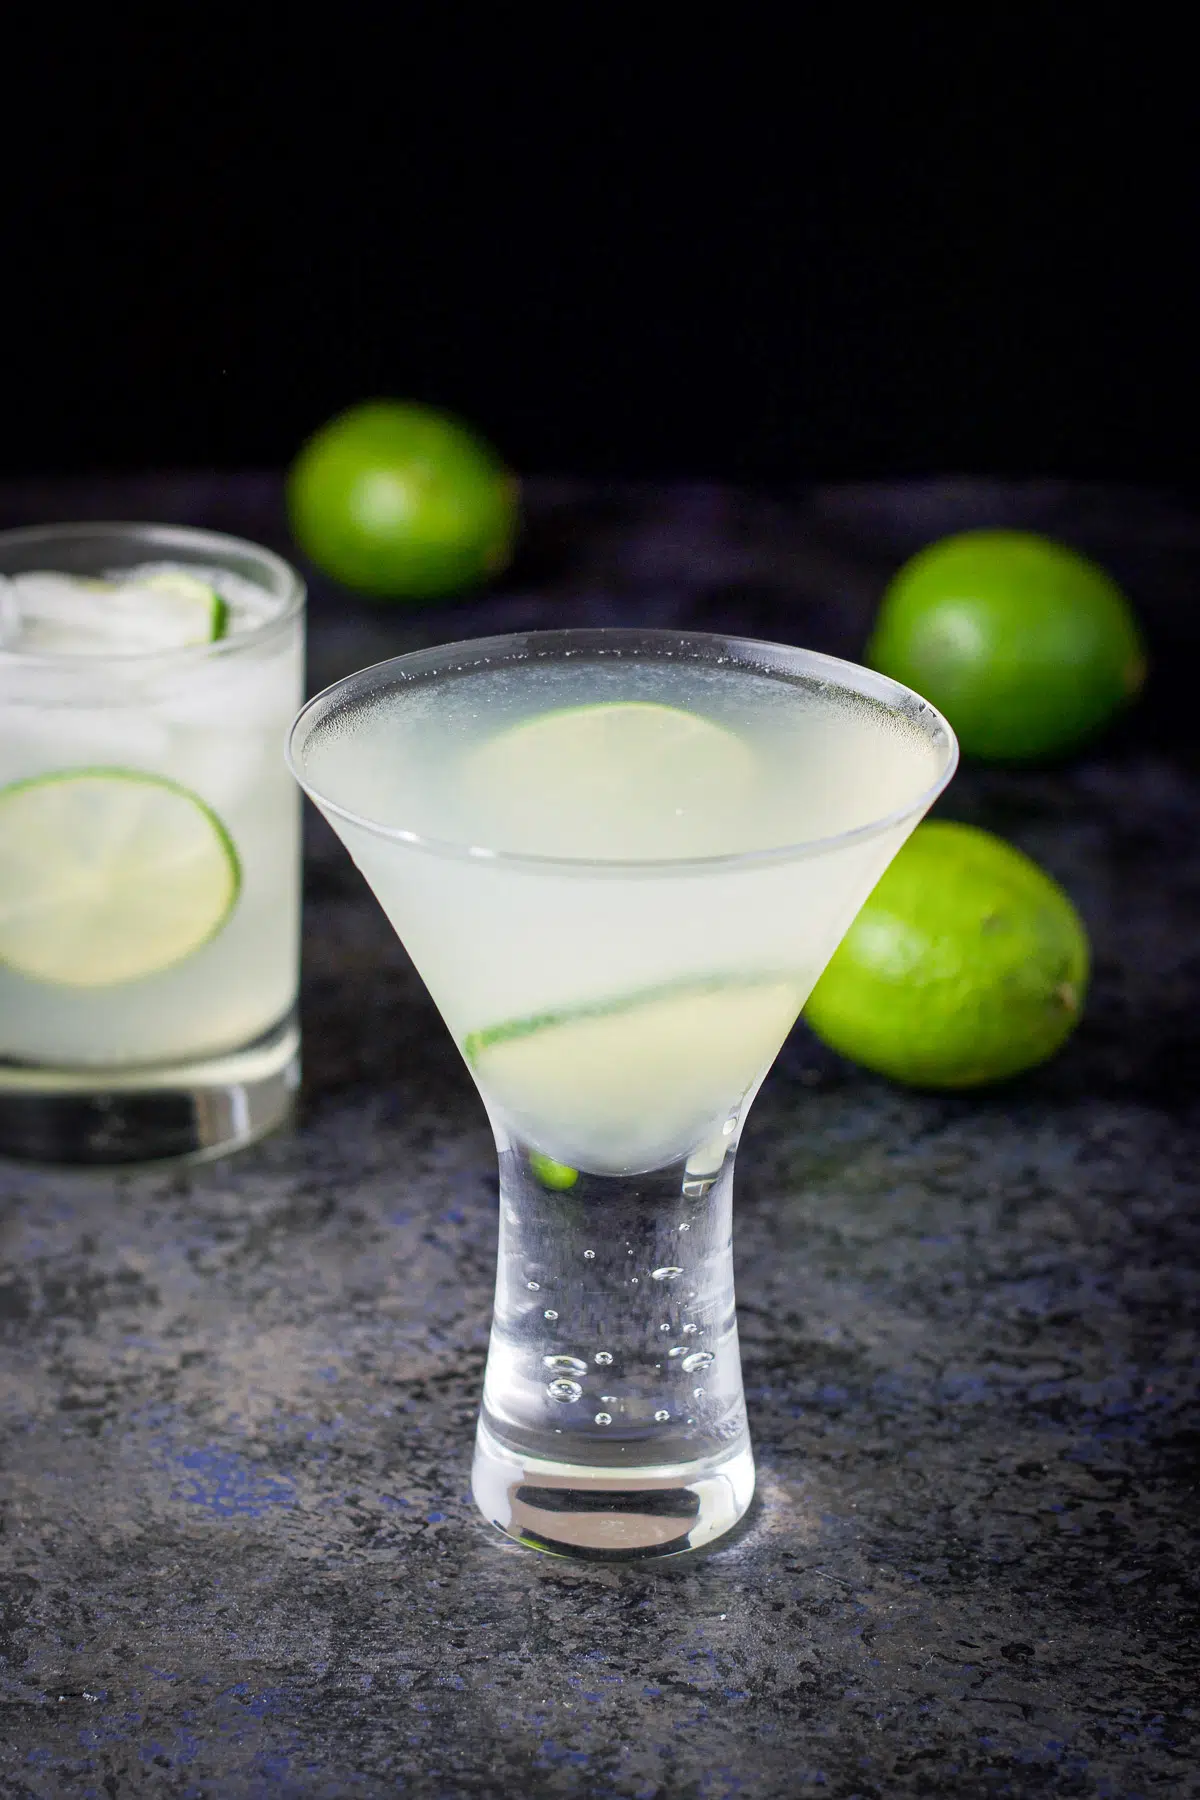 The martini glass filled with the lime drink with garnish and limes in the back